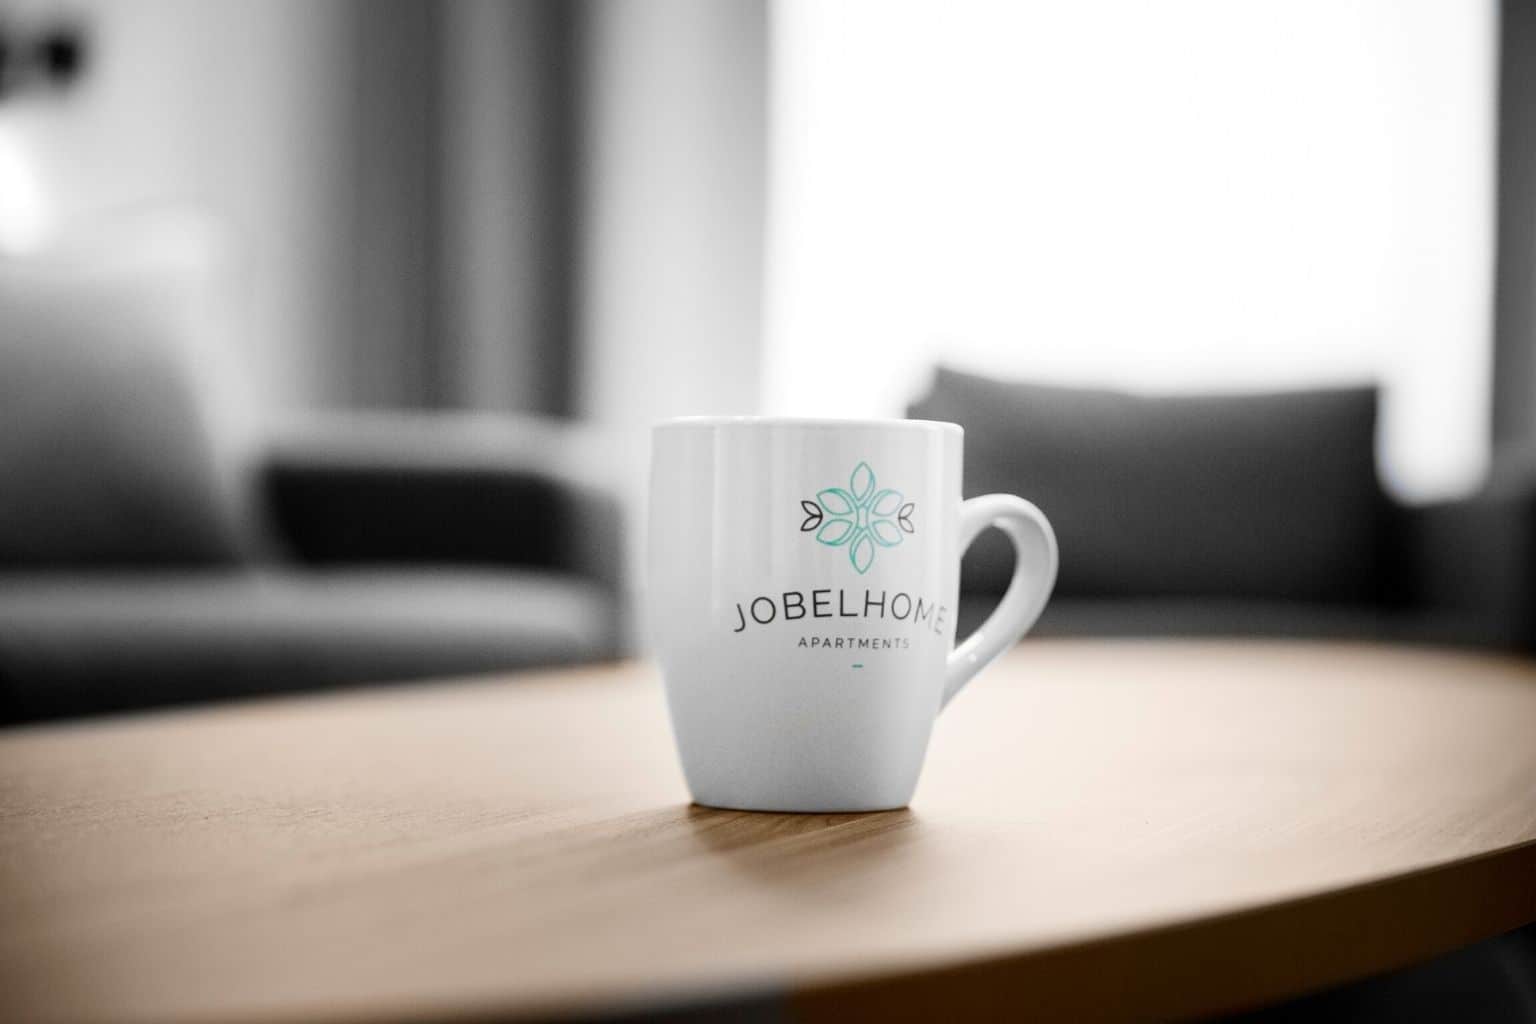 Take a soul warming sip from a Jobelhome mug and feel like you are at home